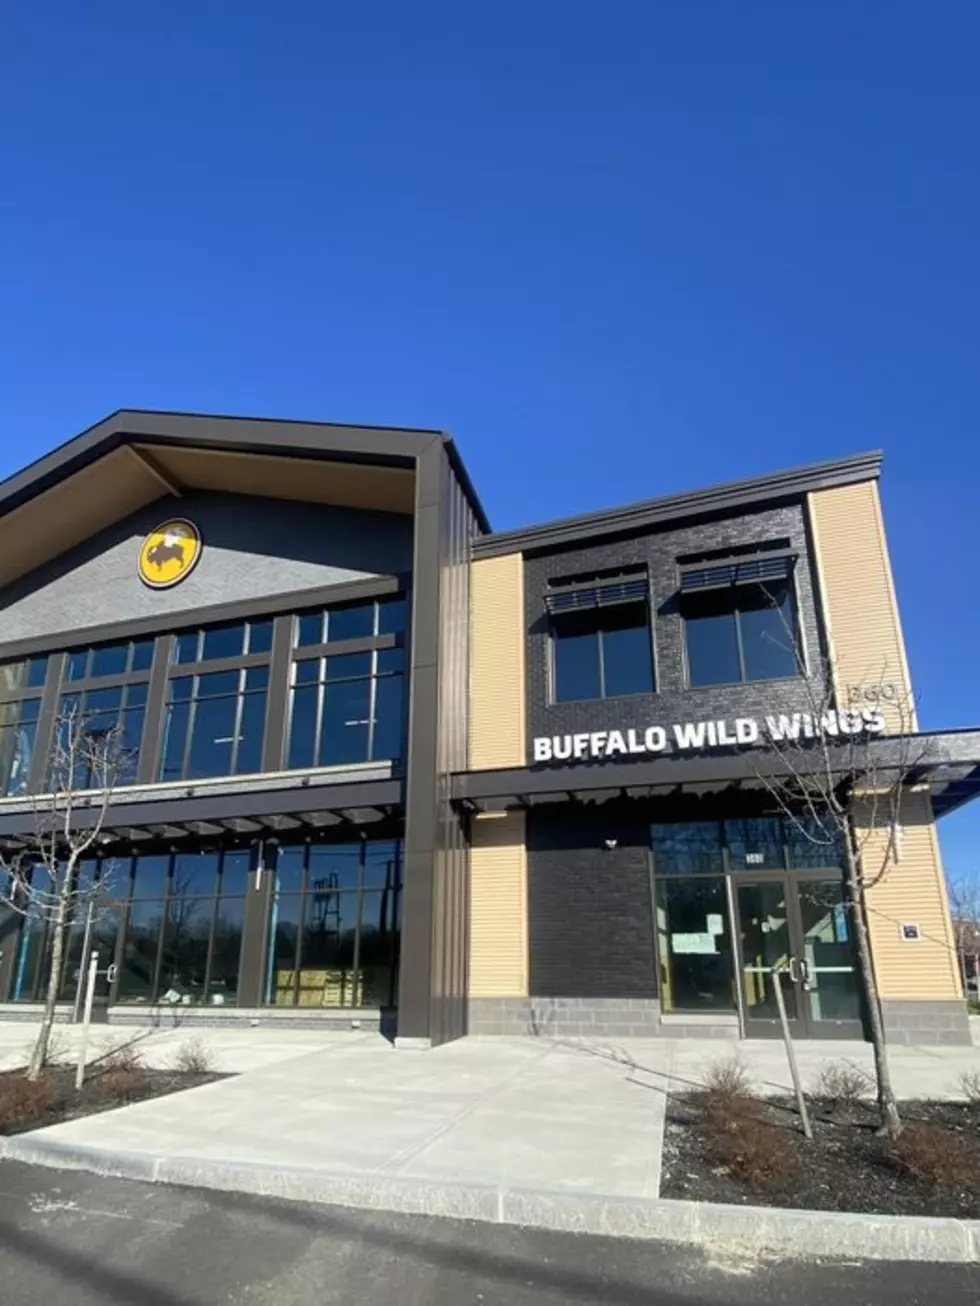 A Letter to the Owners of Buffalo Wild Wings Coming to Portsmouth, New Hampshire &#8211; West End Yards